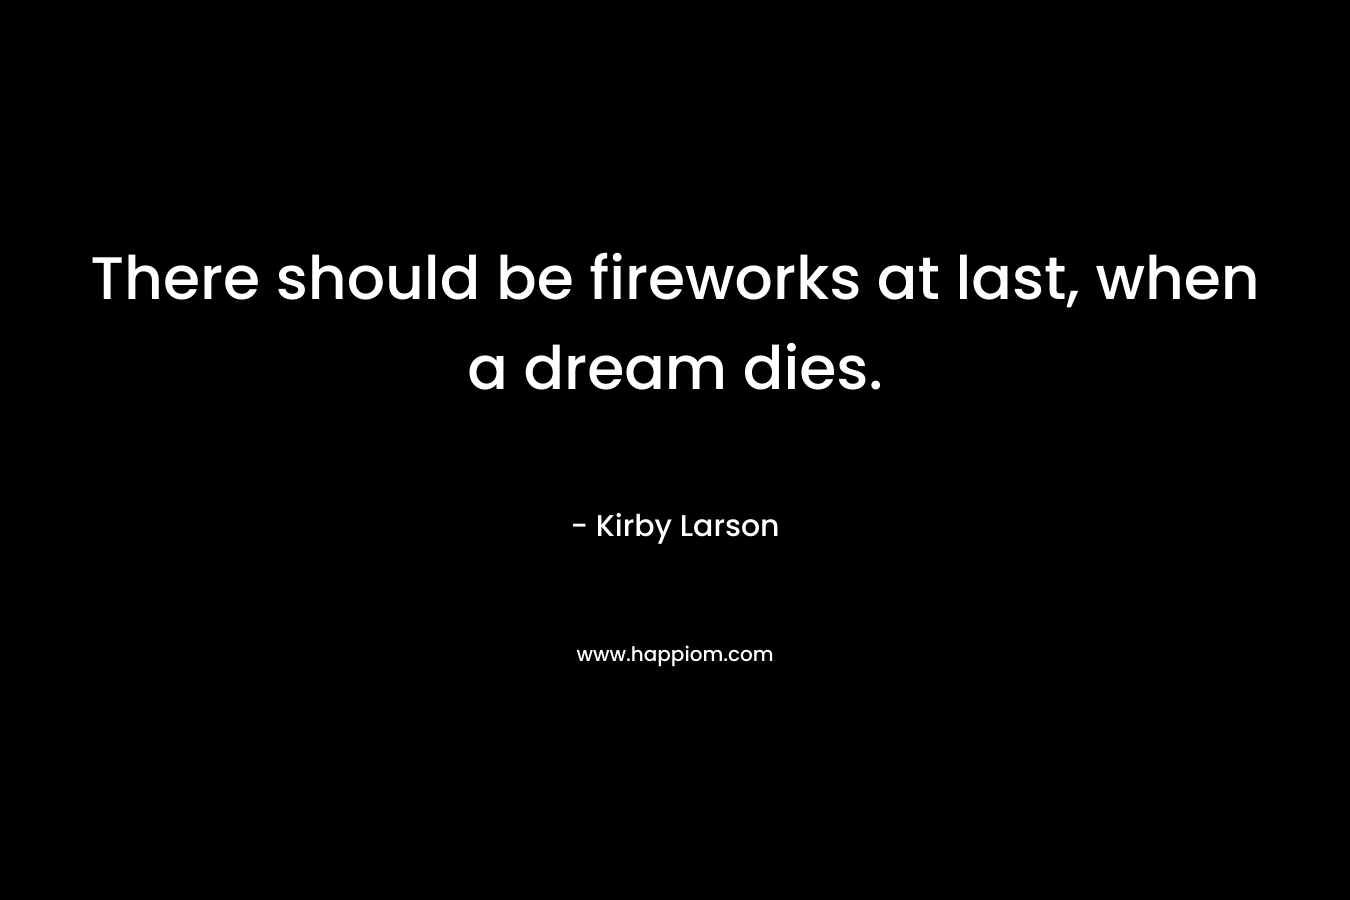 There should be fireworks at last, when a dream dies. – Kirby Larson